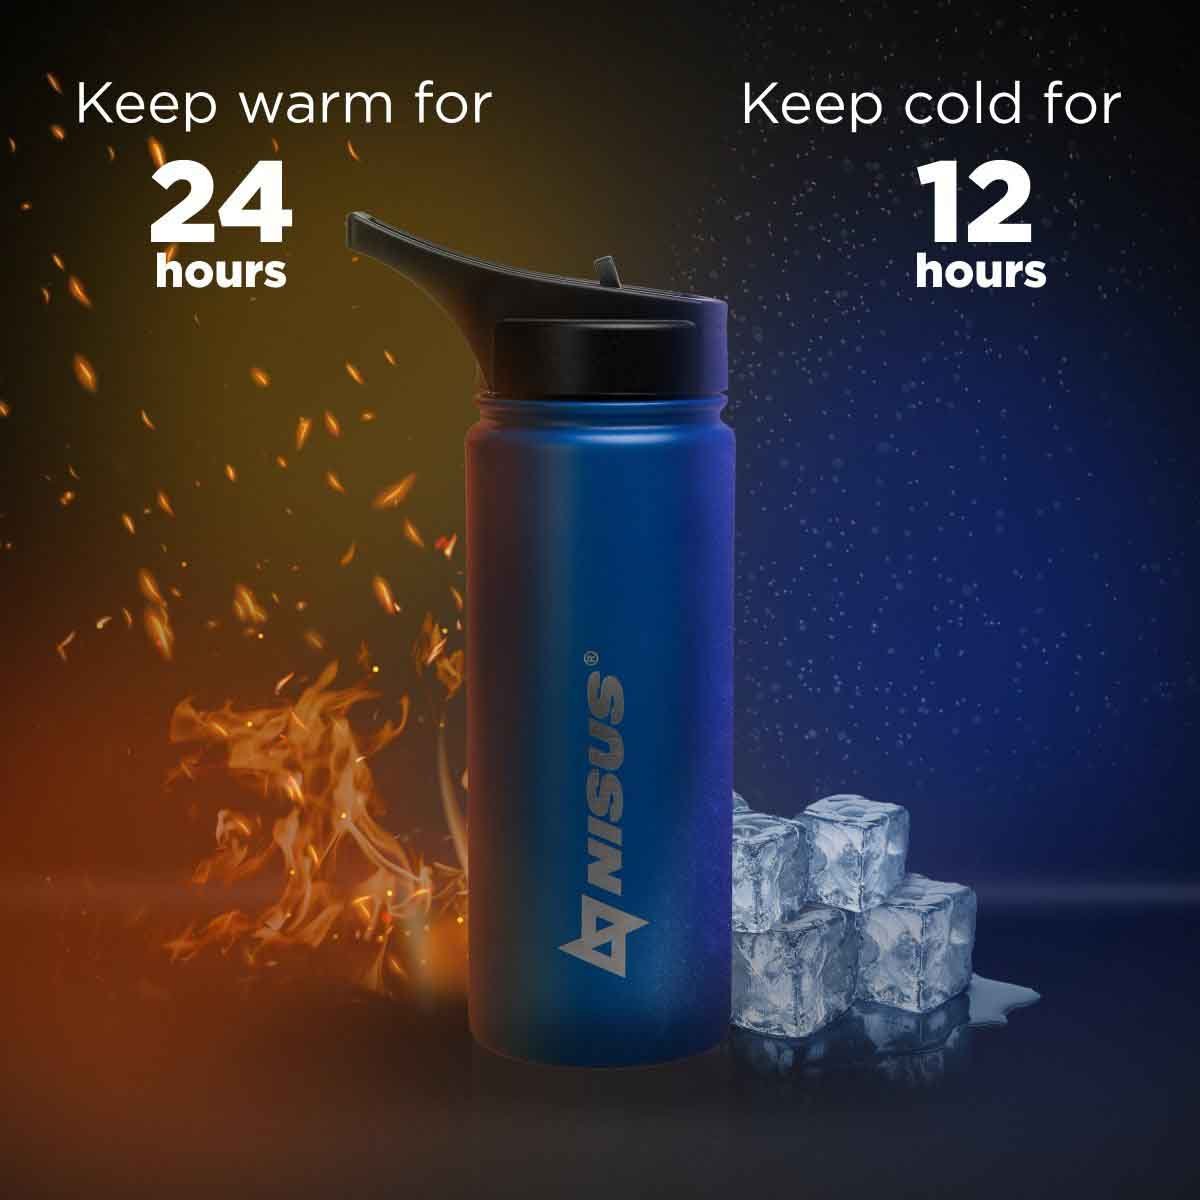 Stainless Steel Insulated Sport Water Bottle with 3 Lid Types, 18 oz keeps water warm for 24 hours and cold for 12 hours